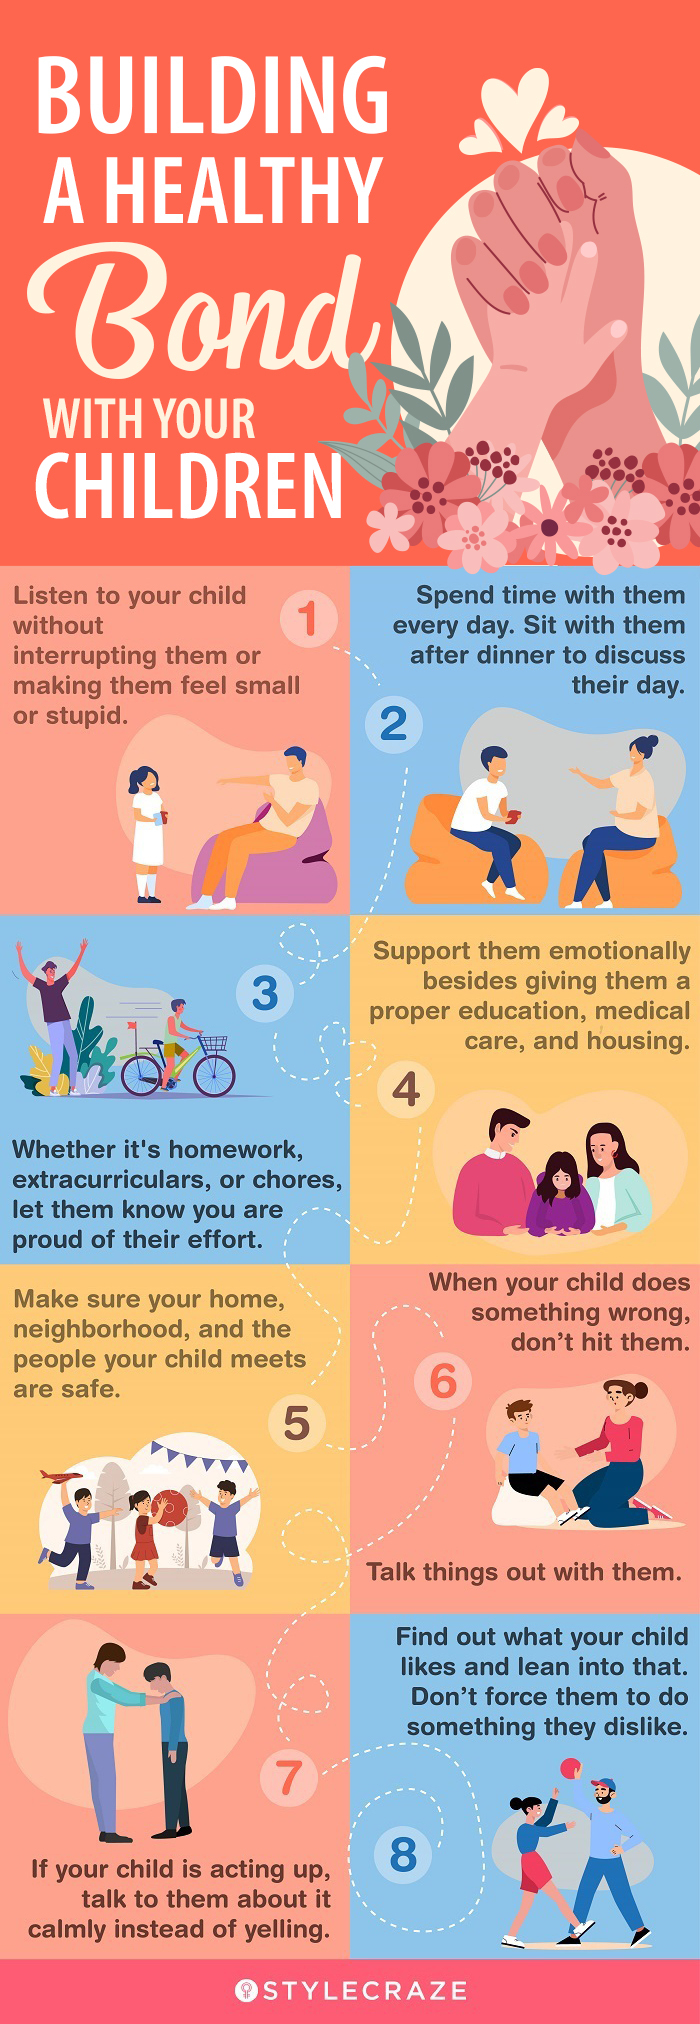 building a healthy bond with your children (infographic)